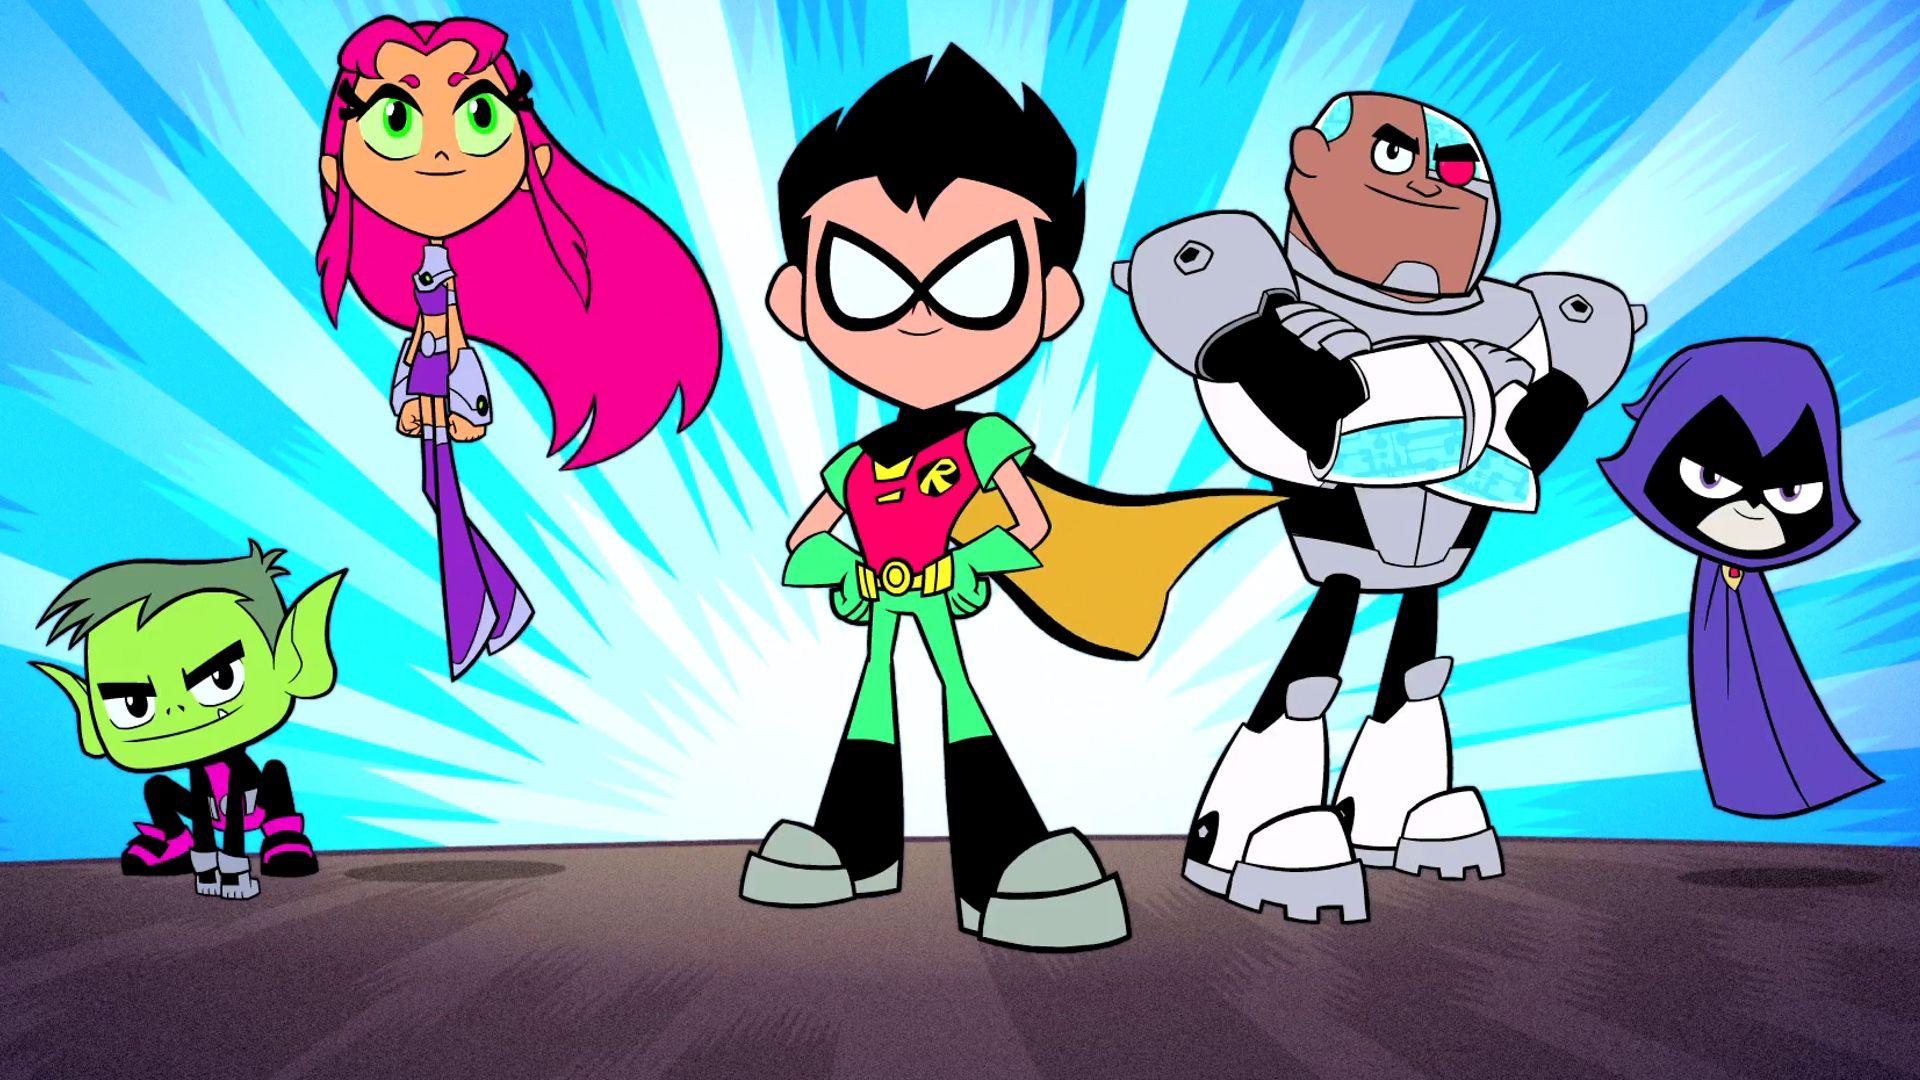 There's an Animated TEEN TITANS GO! Movie Coming to Theaters in 2018